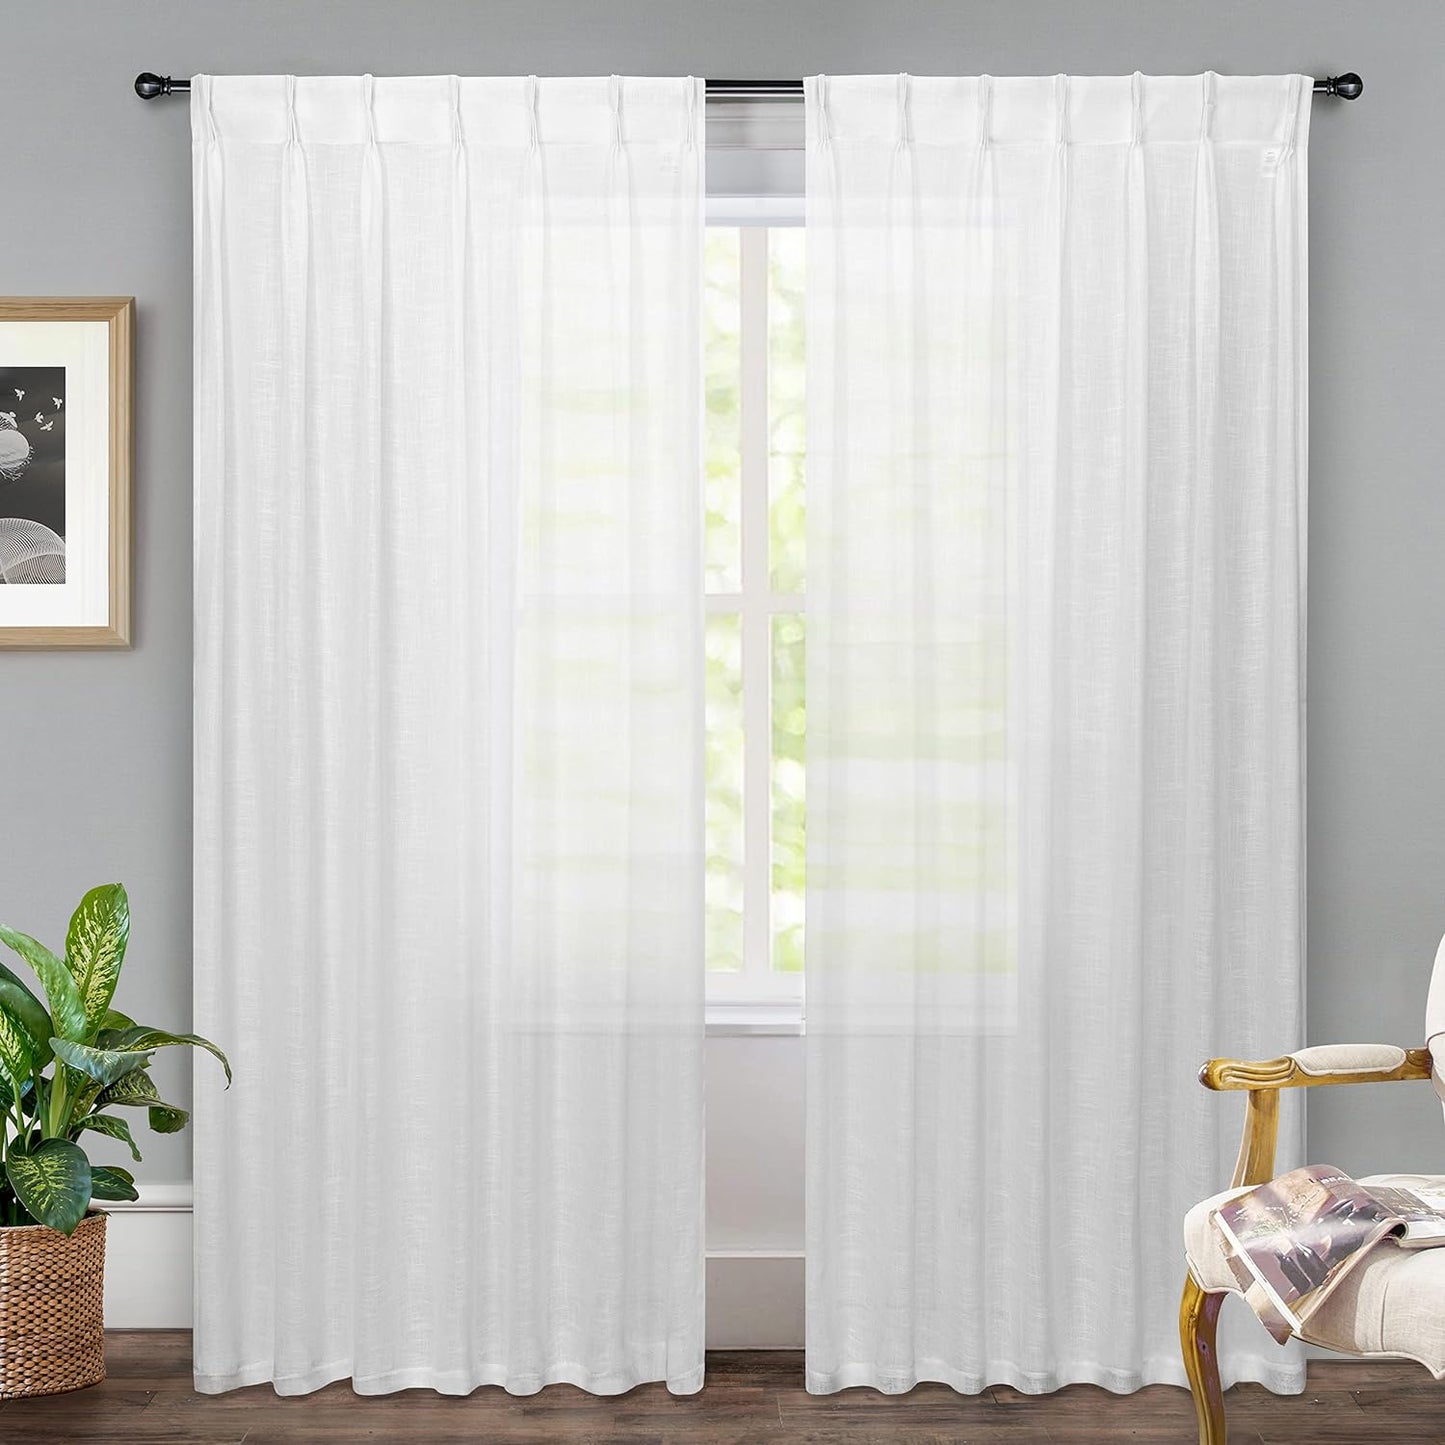 Driftaway Pinch Pleat Sheer Curtains 84 Inch Length 2 Panels Set Back Tab Sheer Vertical Drapes Privacy Added with Light Filtering for Bedroom Living Room Nursery Kids  DriftAway Pinch Pleat-White 52"X96" 